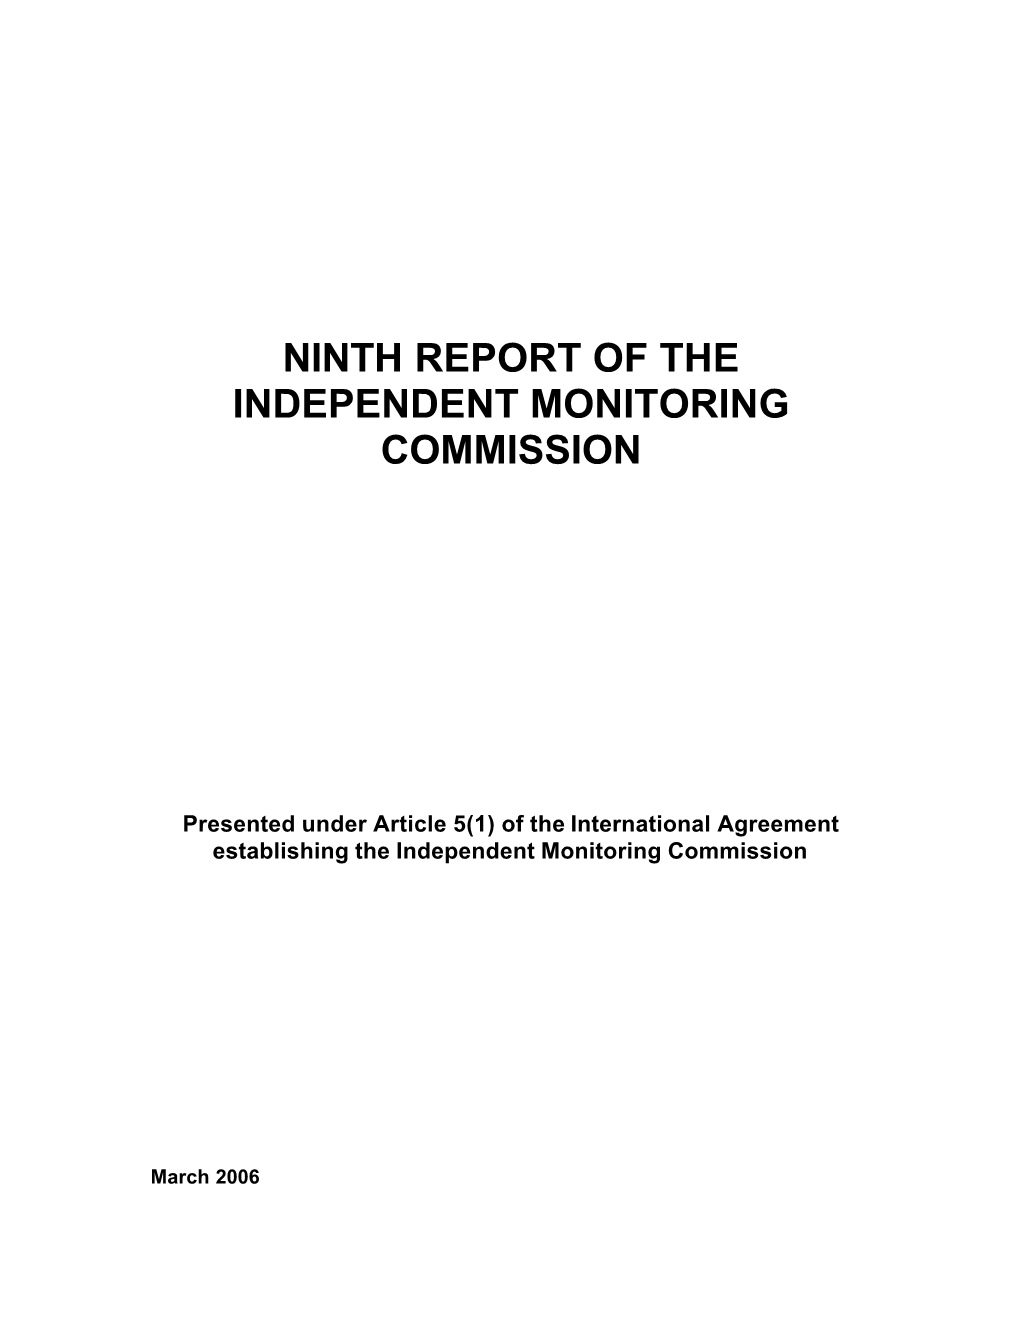 Ninth Report of the Independent Monitoring Commission